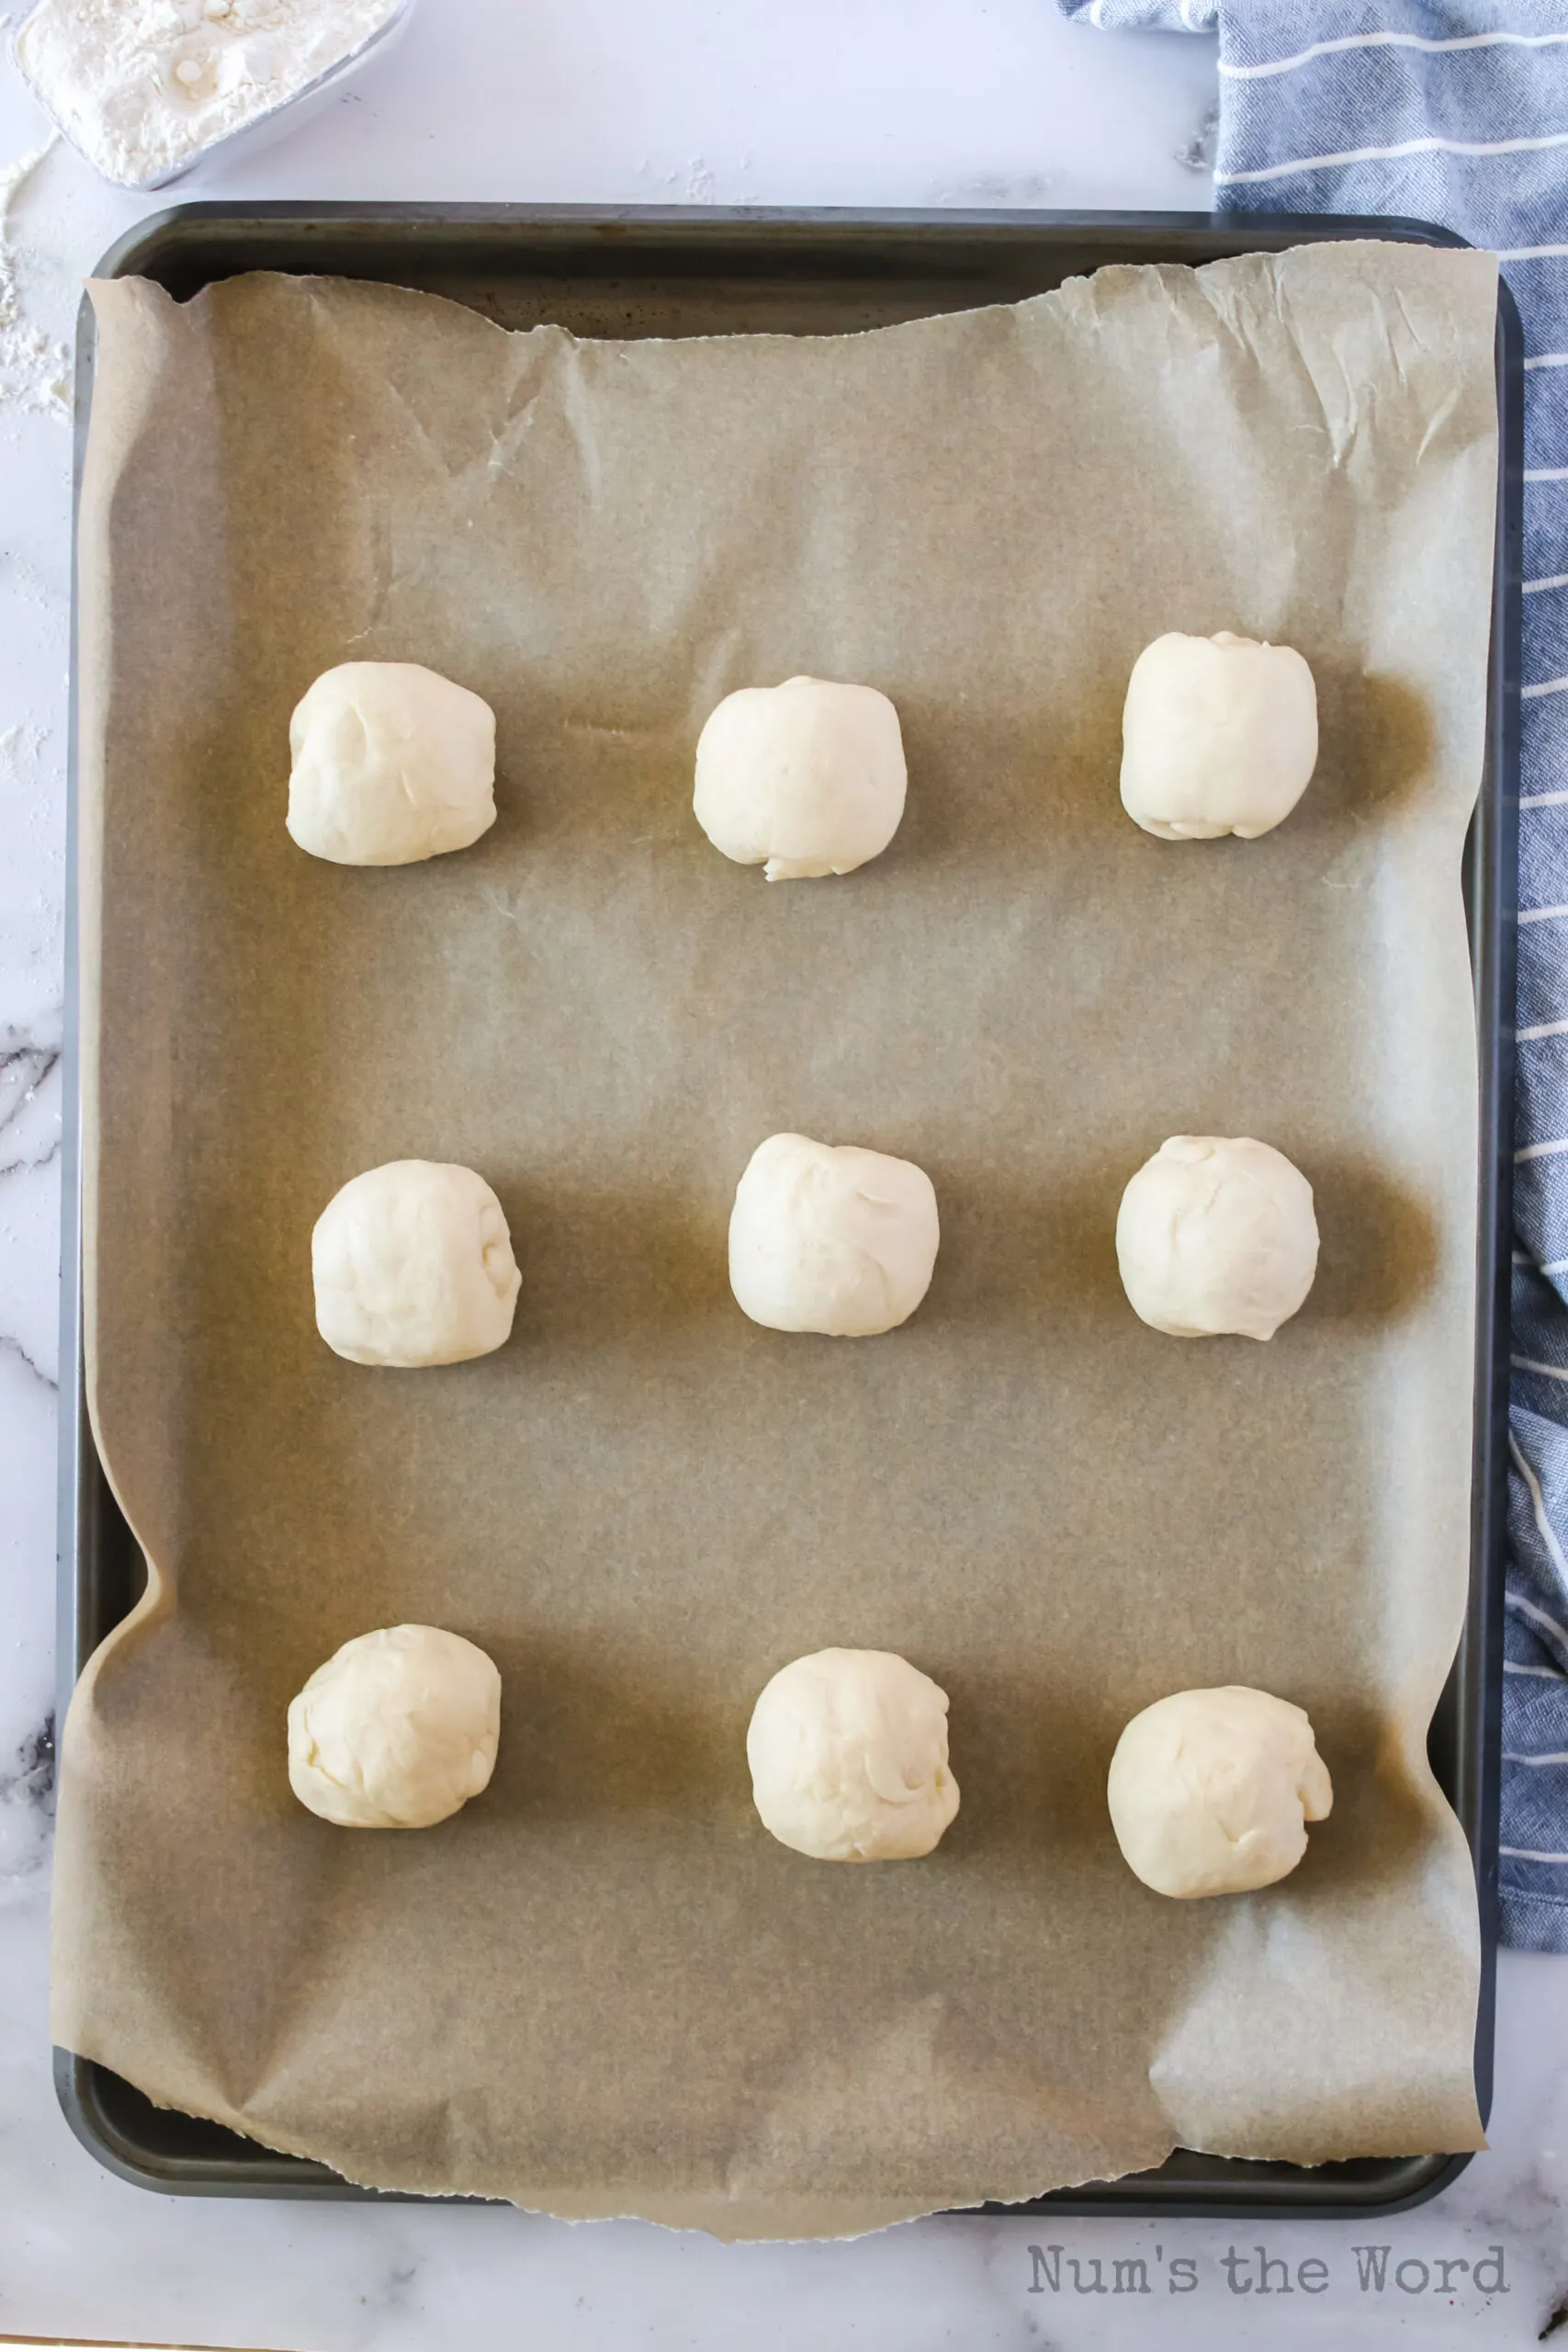 9 rolls placed on a lined cookie sheet.